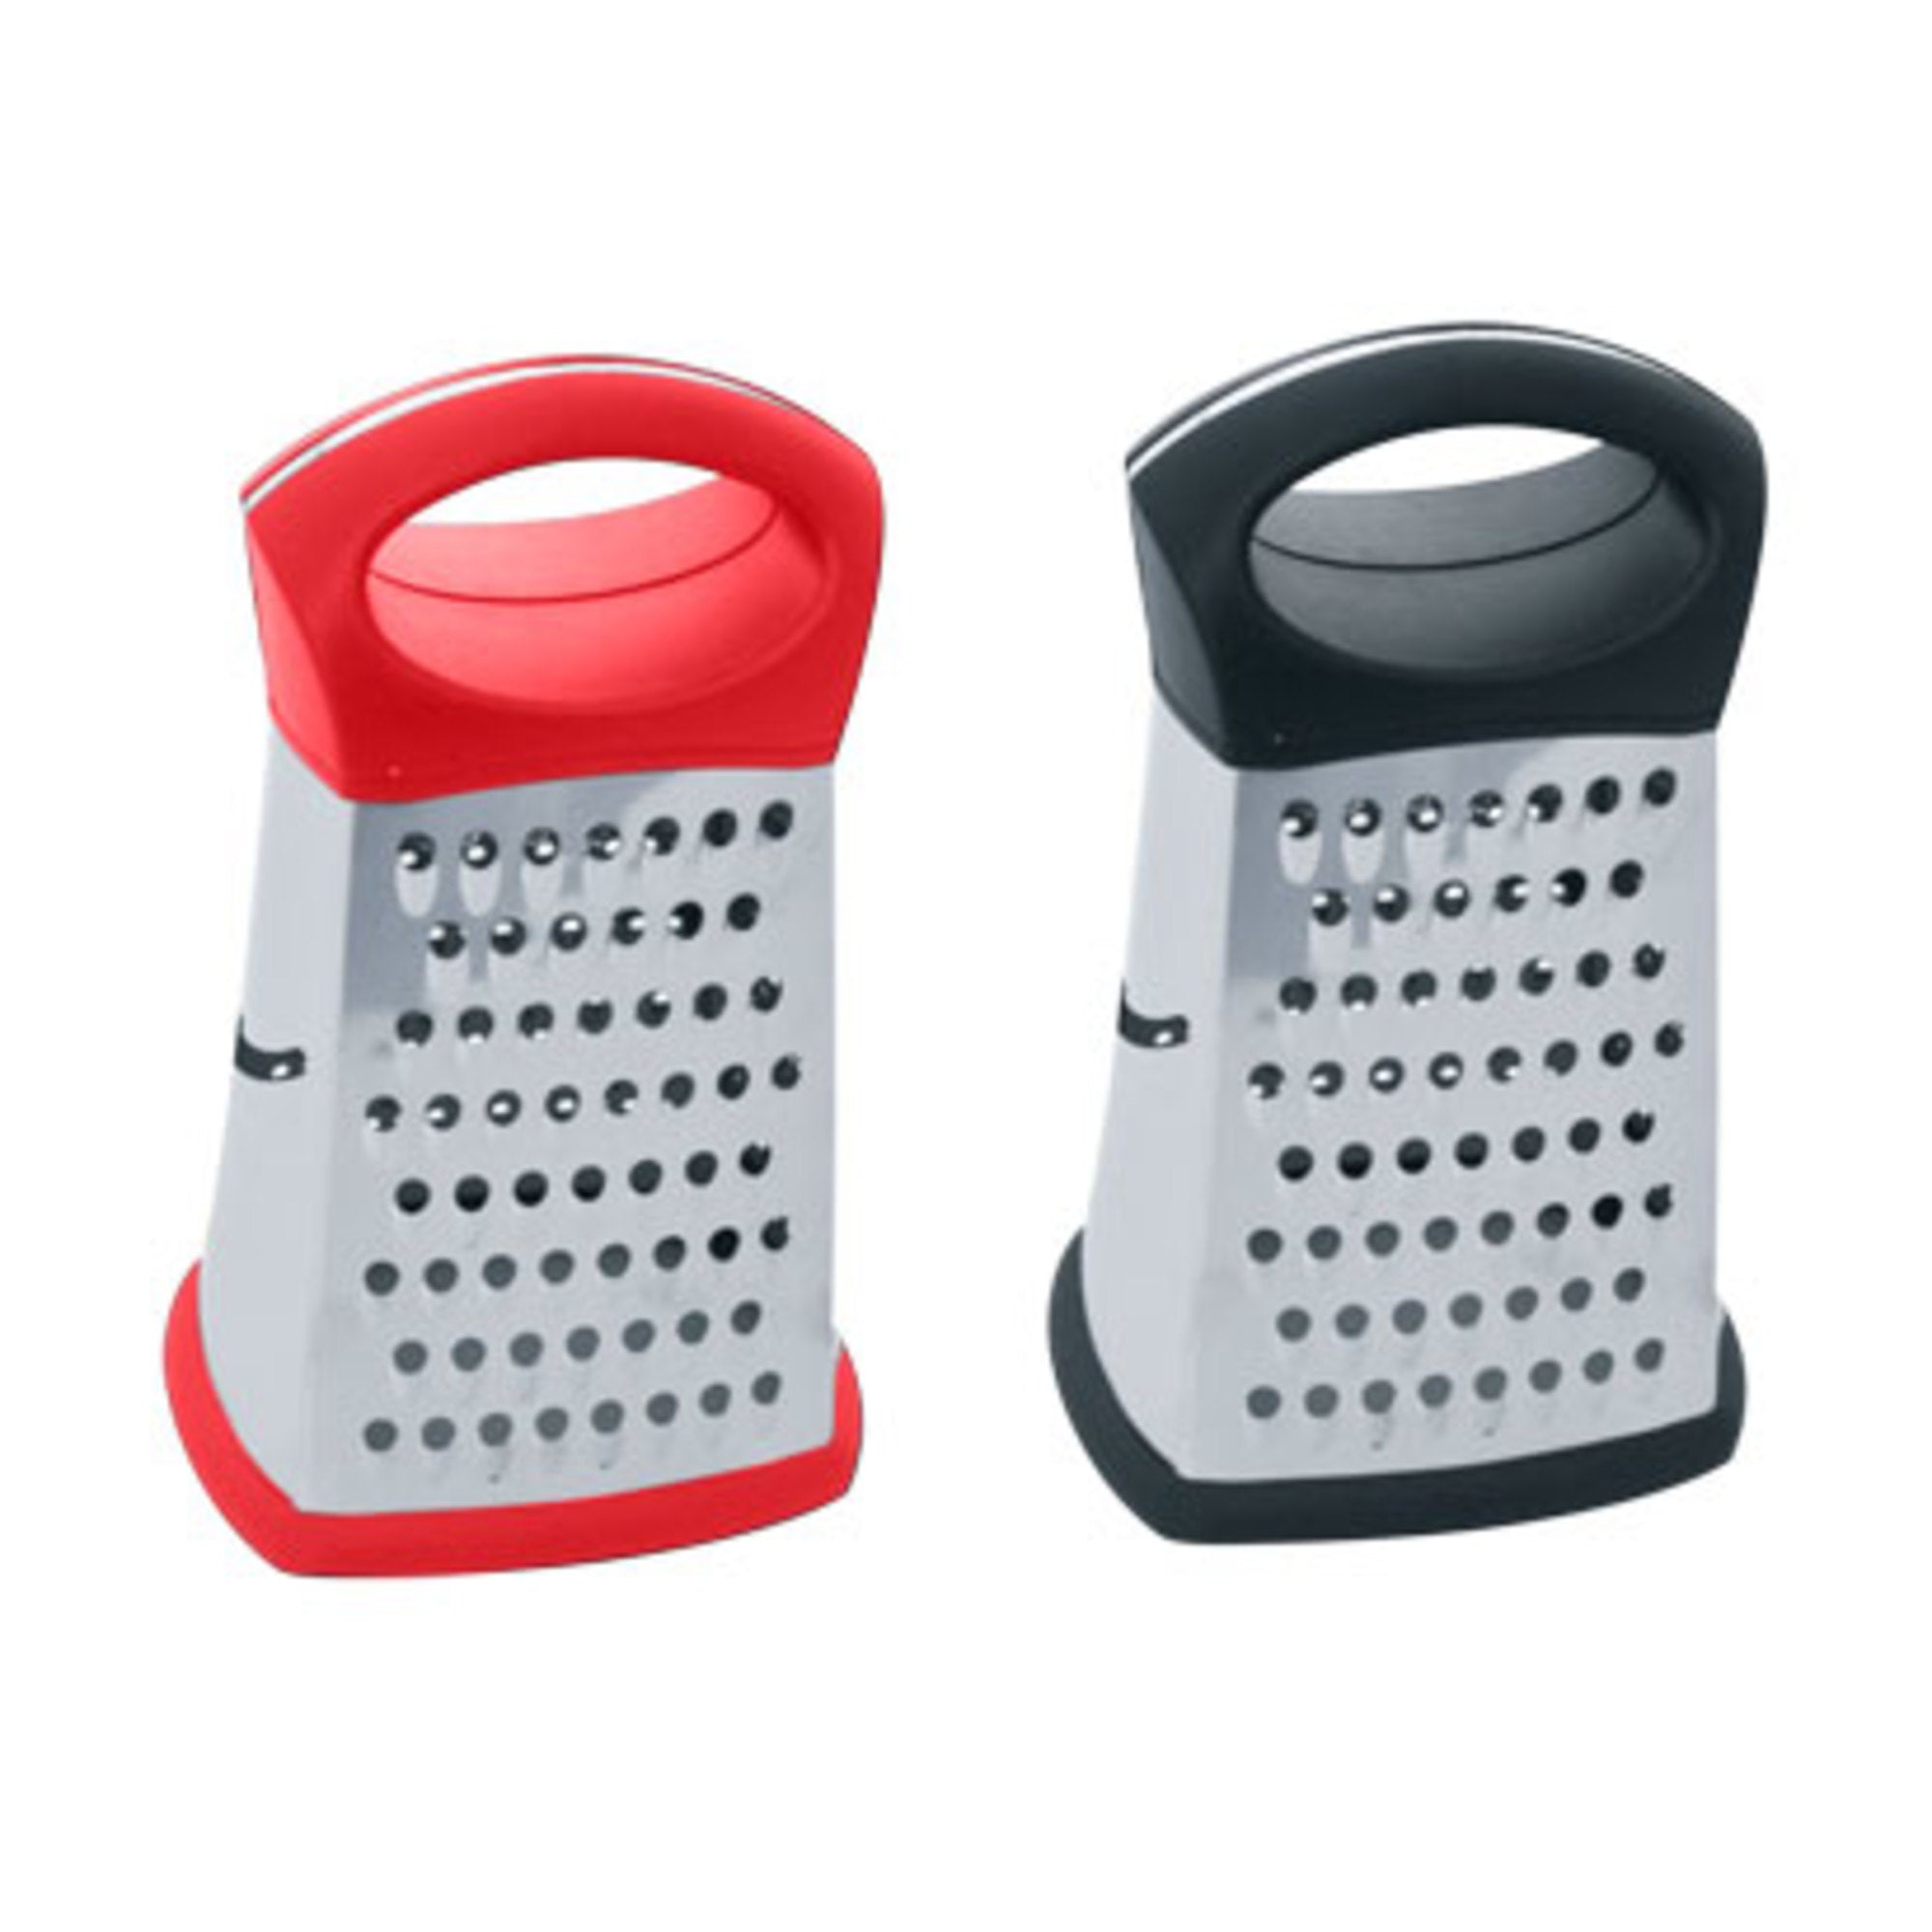 The Grater Scale And Handle - 6 Sided Metal Cheese Grater